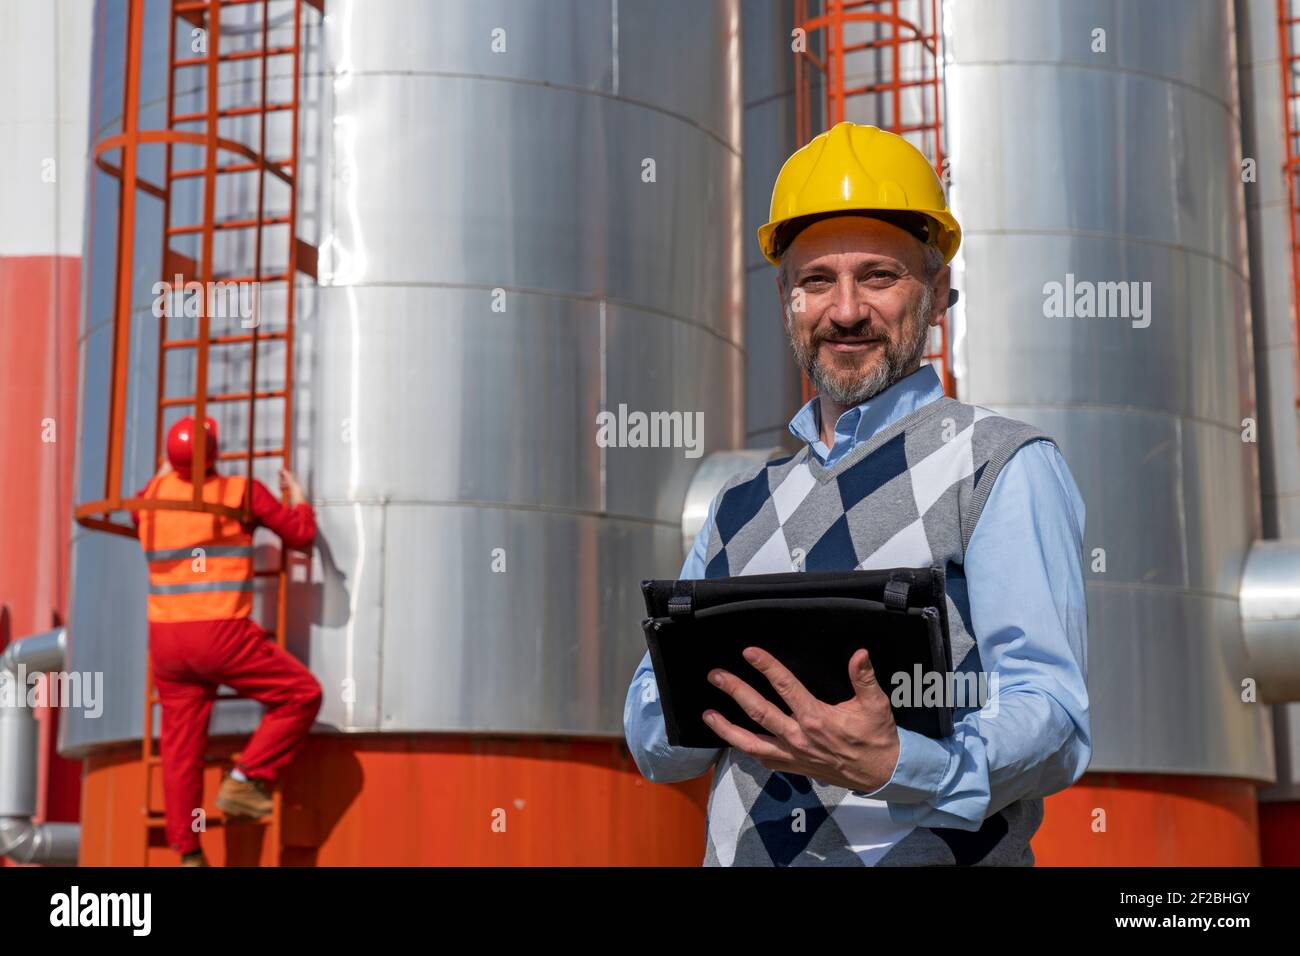 Portrait of Businessperson in Yellow Work Helmet Using Digital Tablet in Oil Refinery. Digital Technology Concept. Industry 4.0 Stock Photo